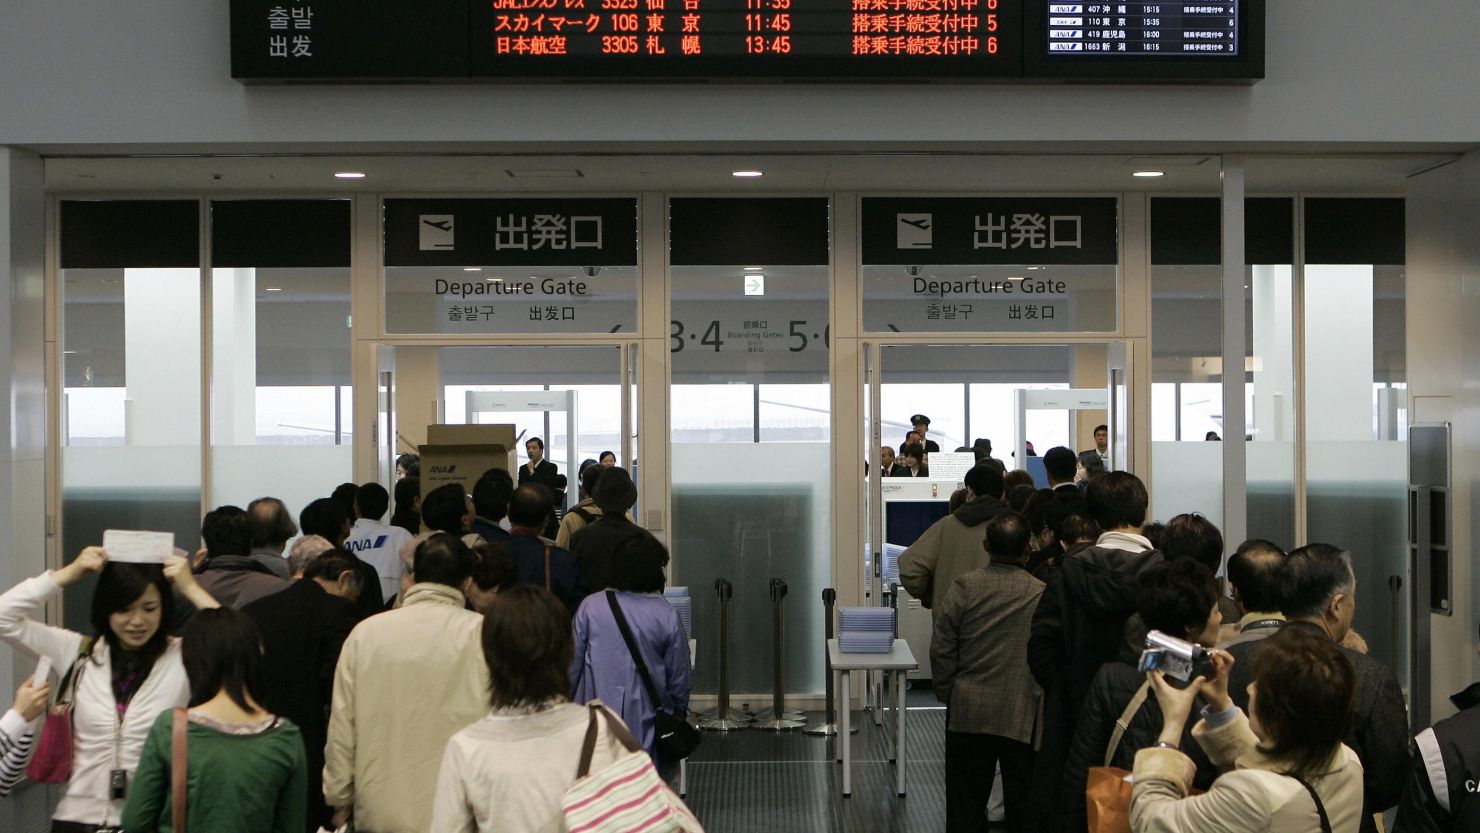 Ready, set, scramble: Bulky hand luggage and priority boarding could be causing more delays, not less.